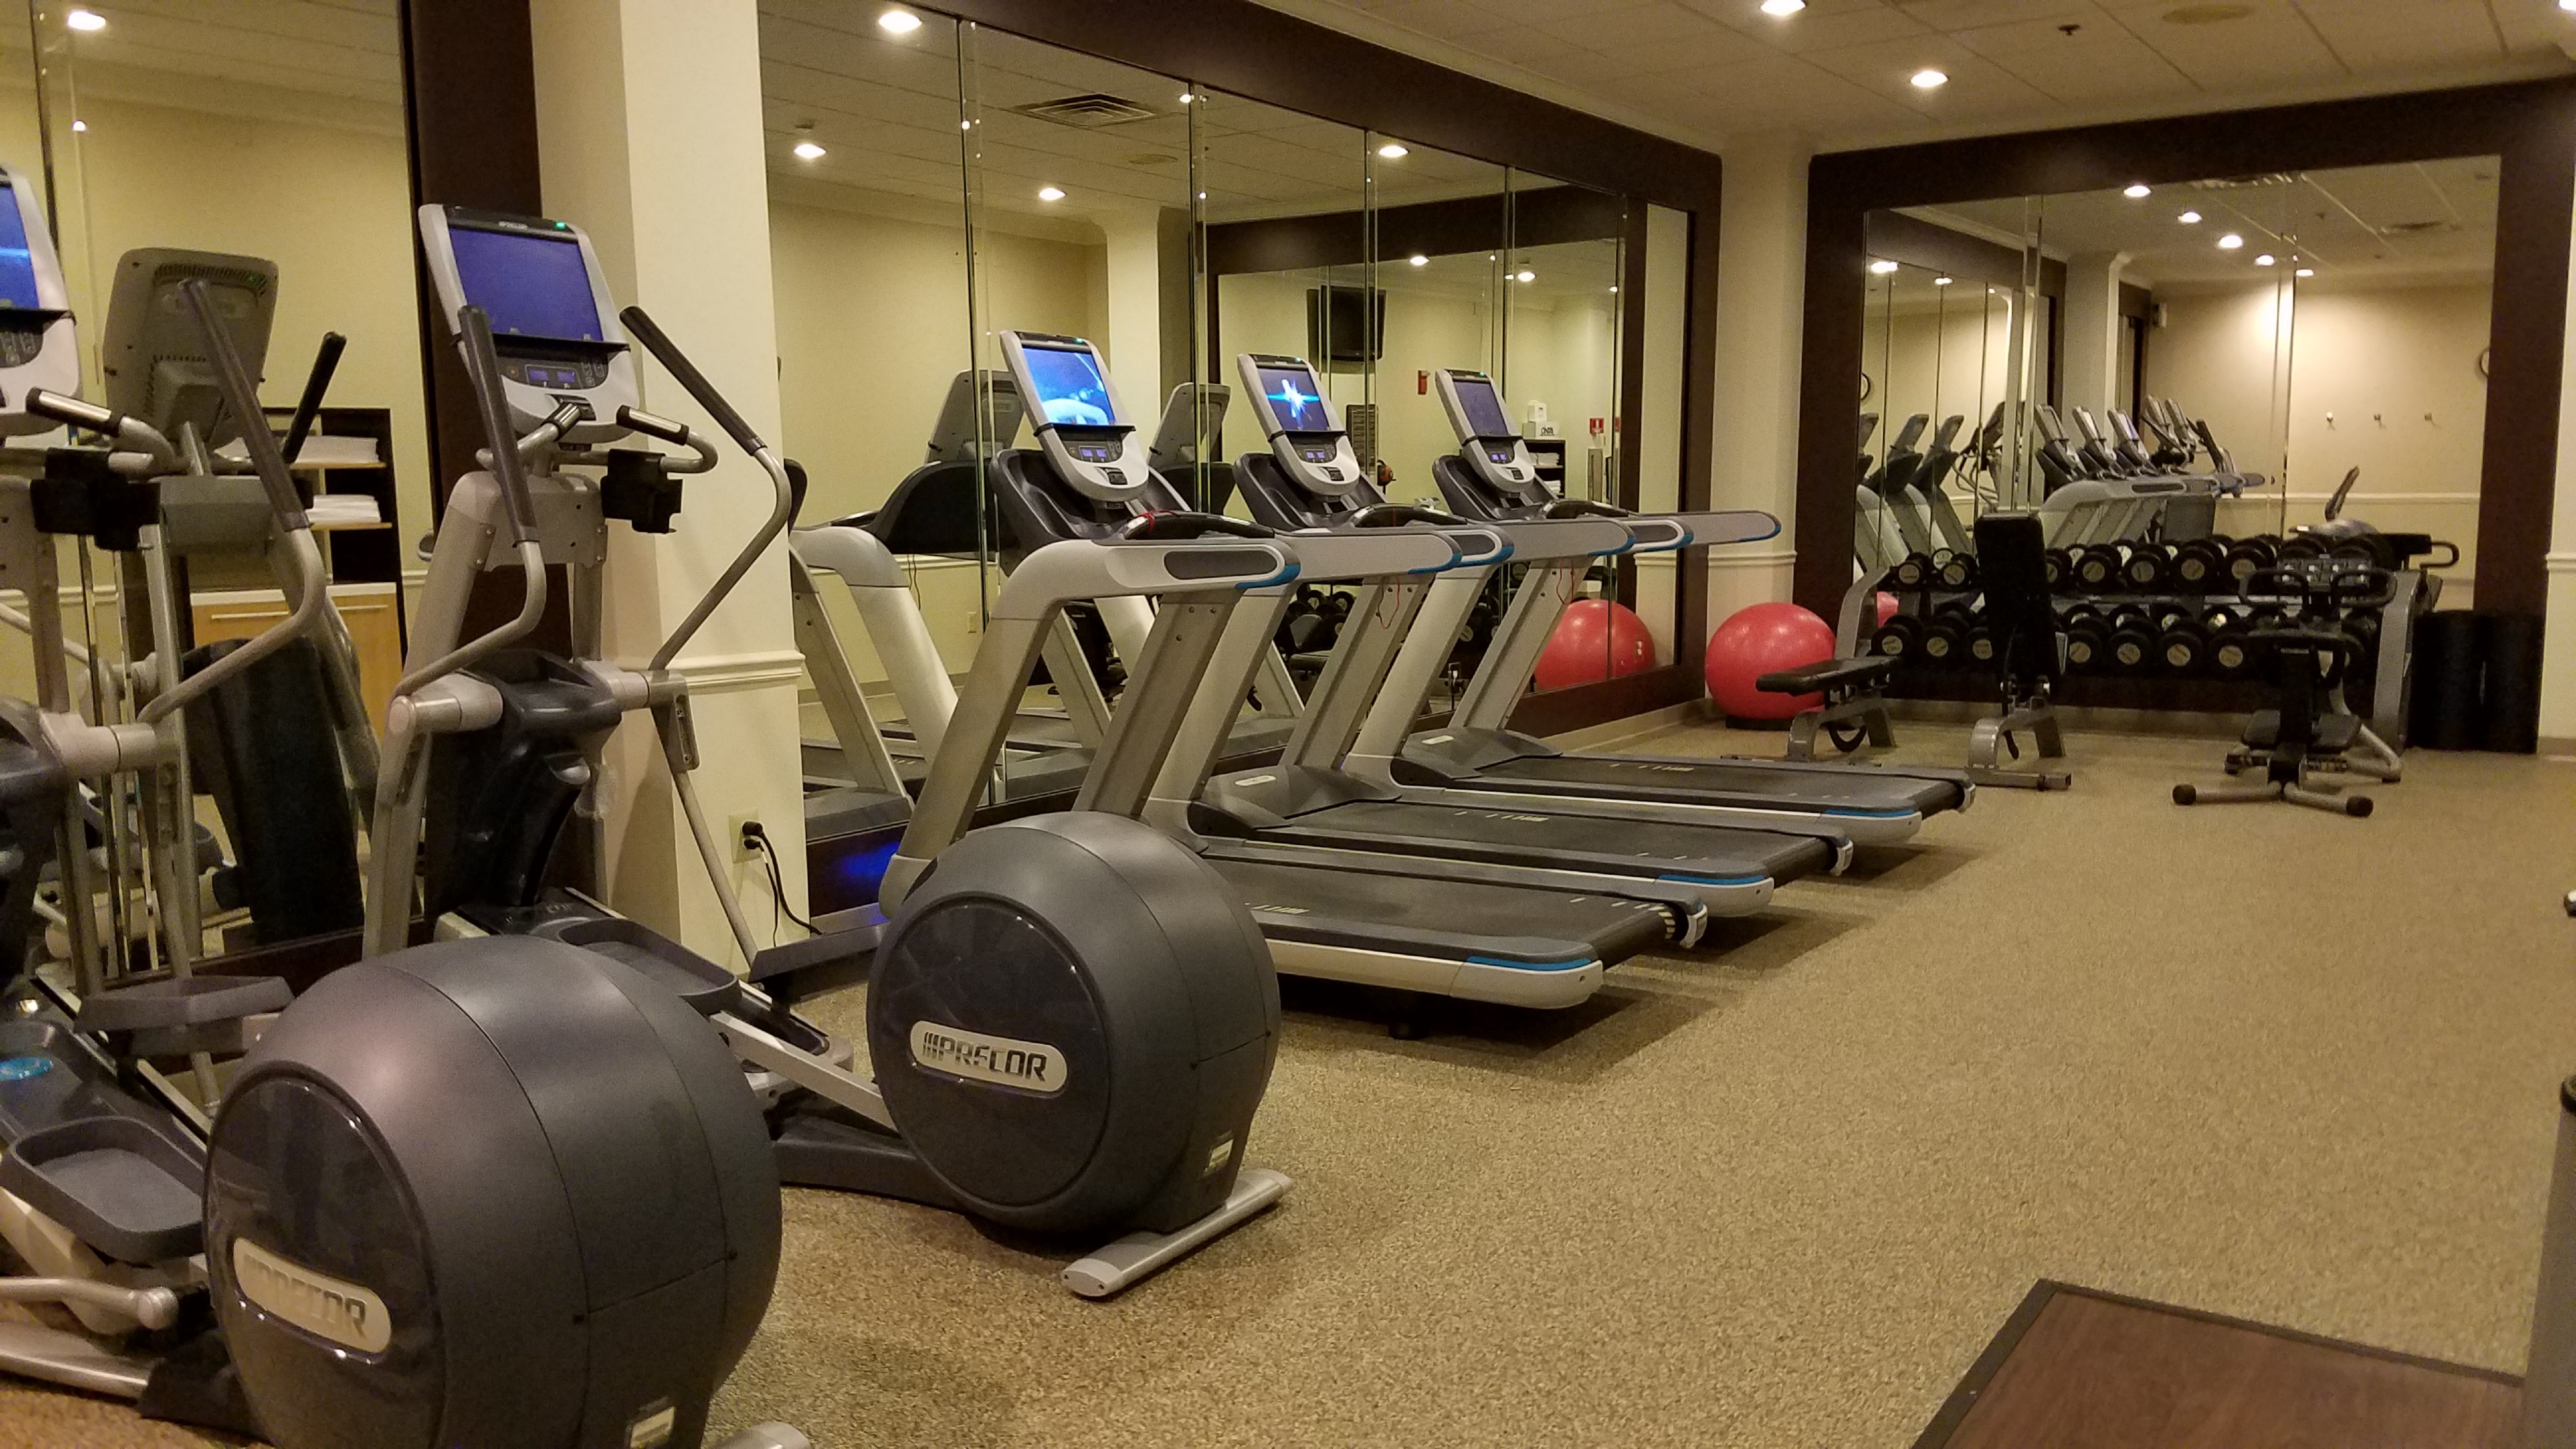 Fitness Center With Cardio Equipment Facing Mirrored Wall, Red Exercise Balls, Free Weights, and Weight Benches